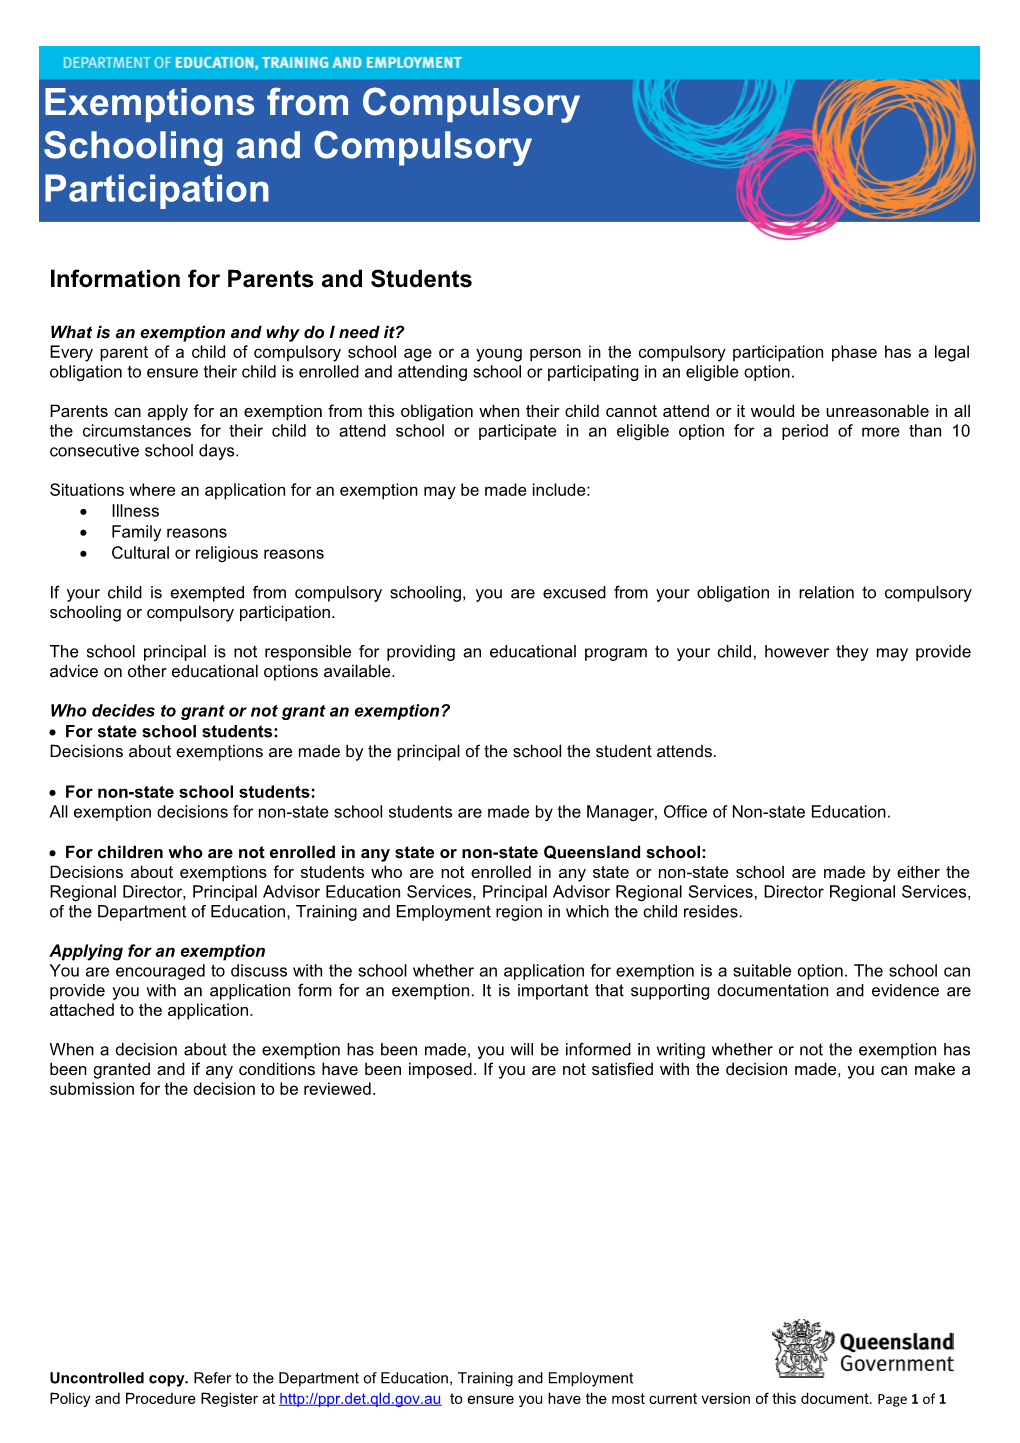 Information for Parents/Students - Exemptions from Compulsory Schooling and Compulsory